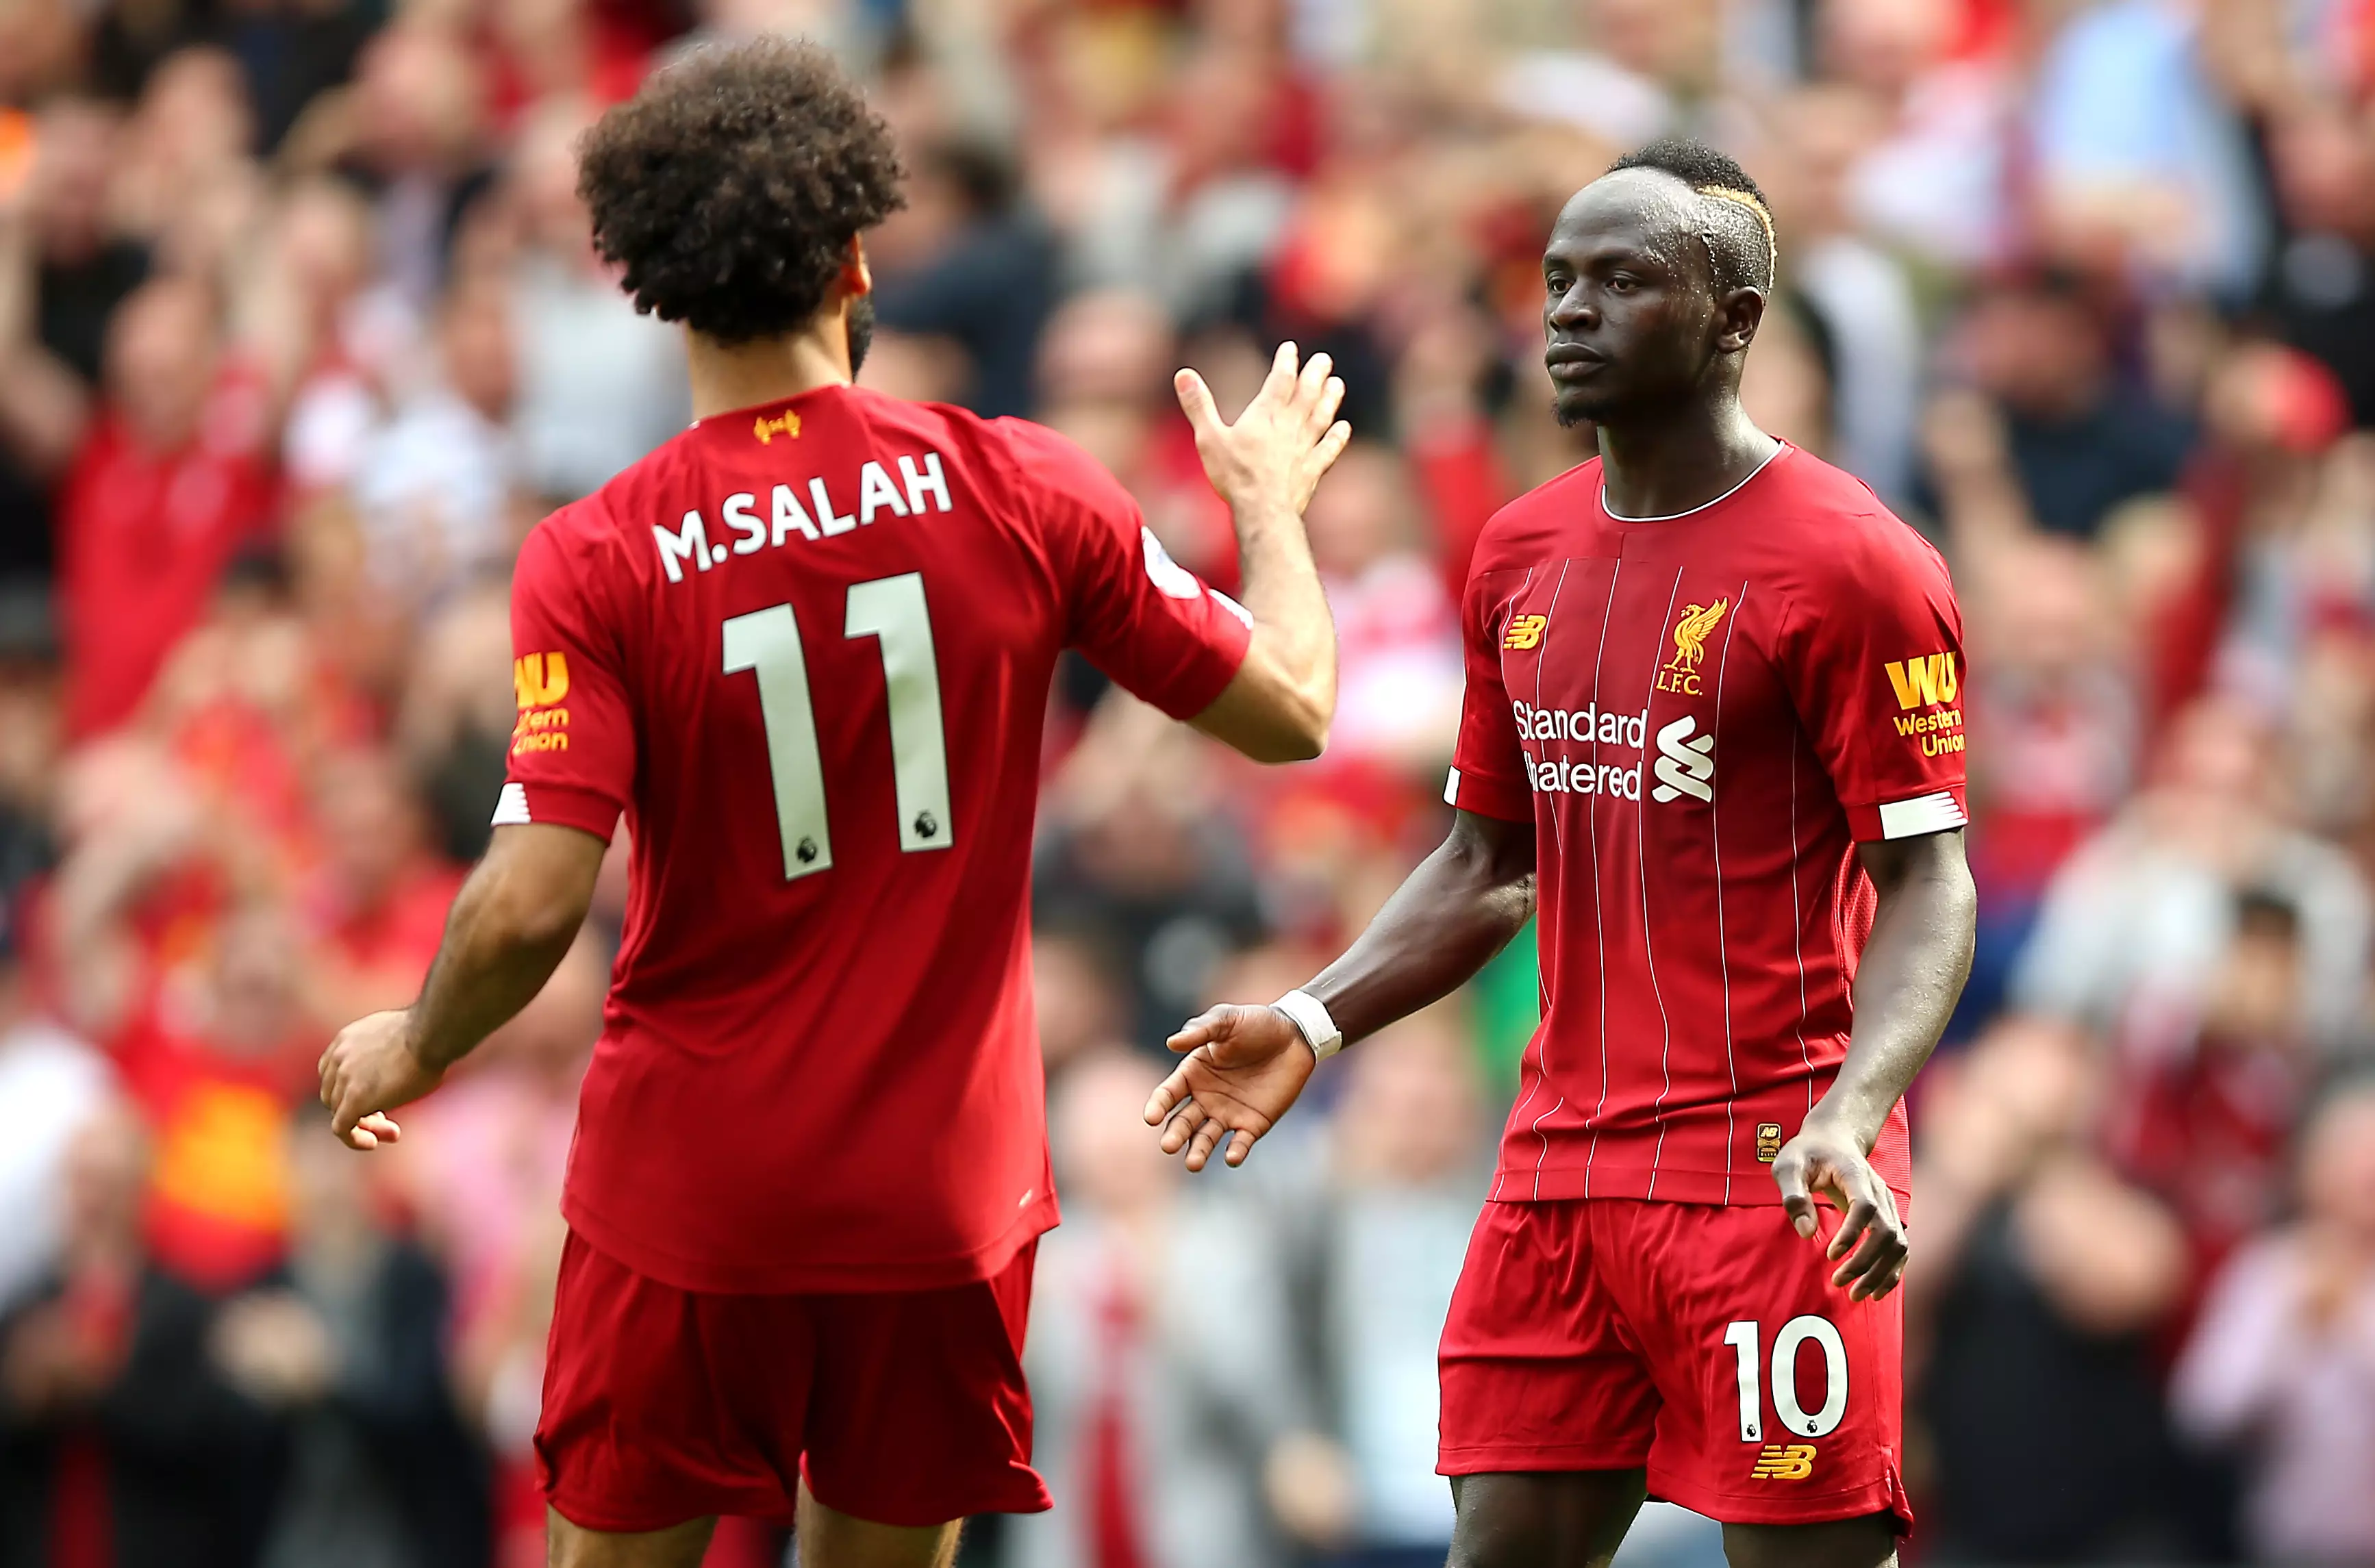 Mane and teammate Mohamed Salah in action today (Image